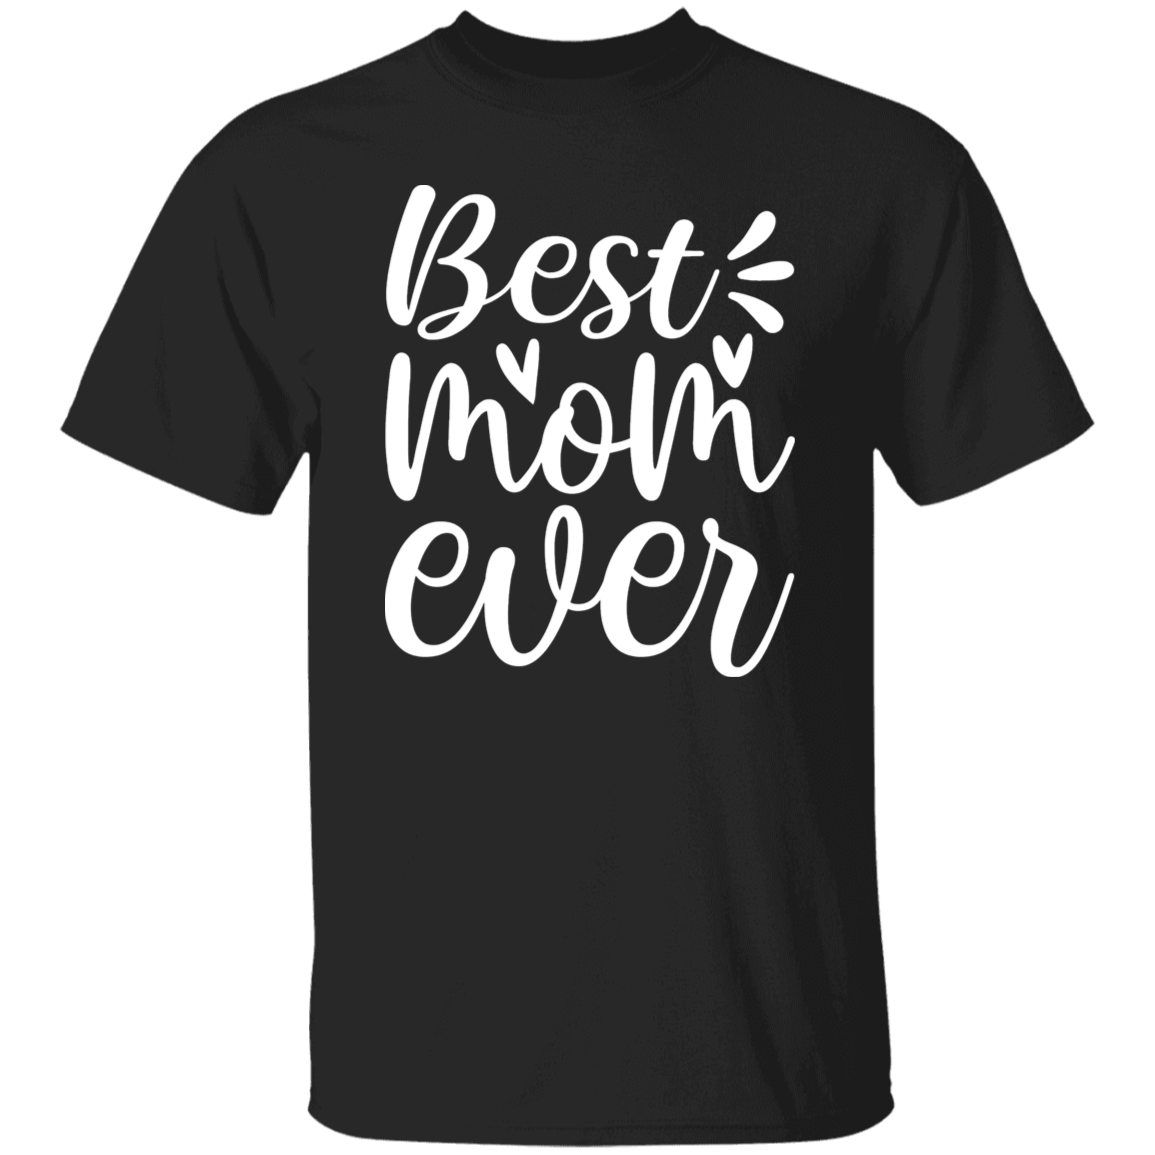 Best Mom Ever Premium T-Shirt - Perfect Gift for Mom